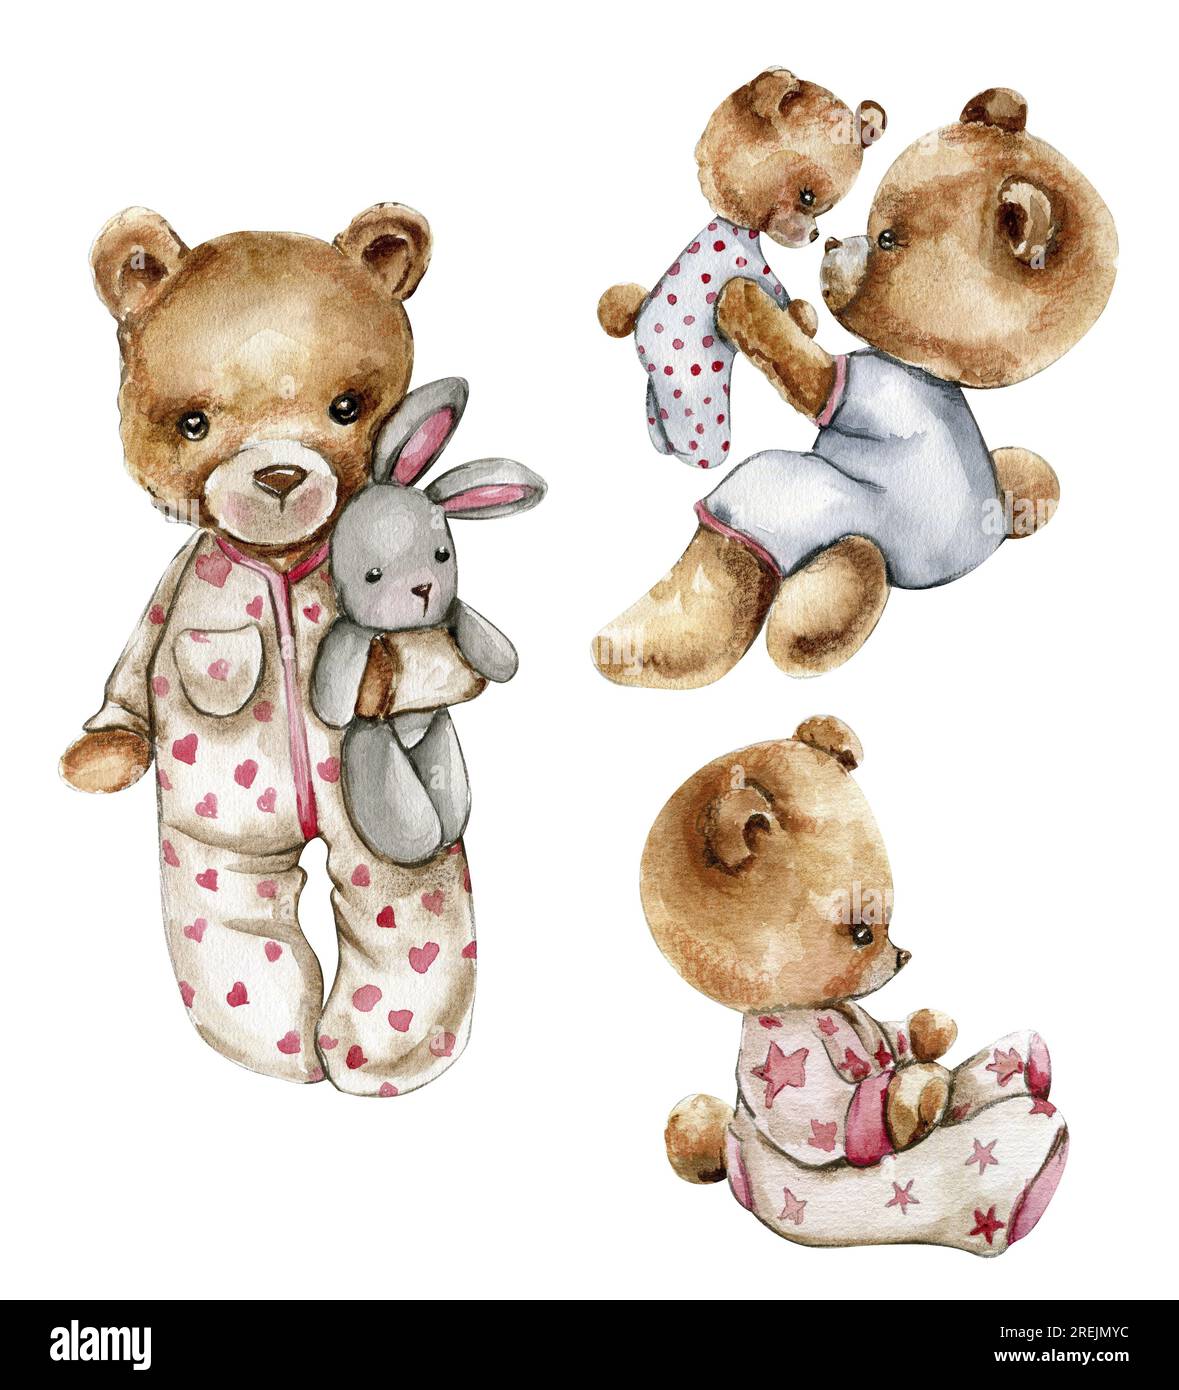 Teddy bear baby and in pijama with mother. Design for baby shower party, birthday, cake, holiday design, greetings card, invitation. Stock Photo